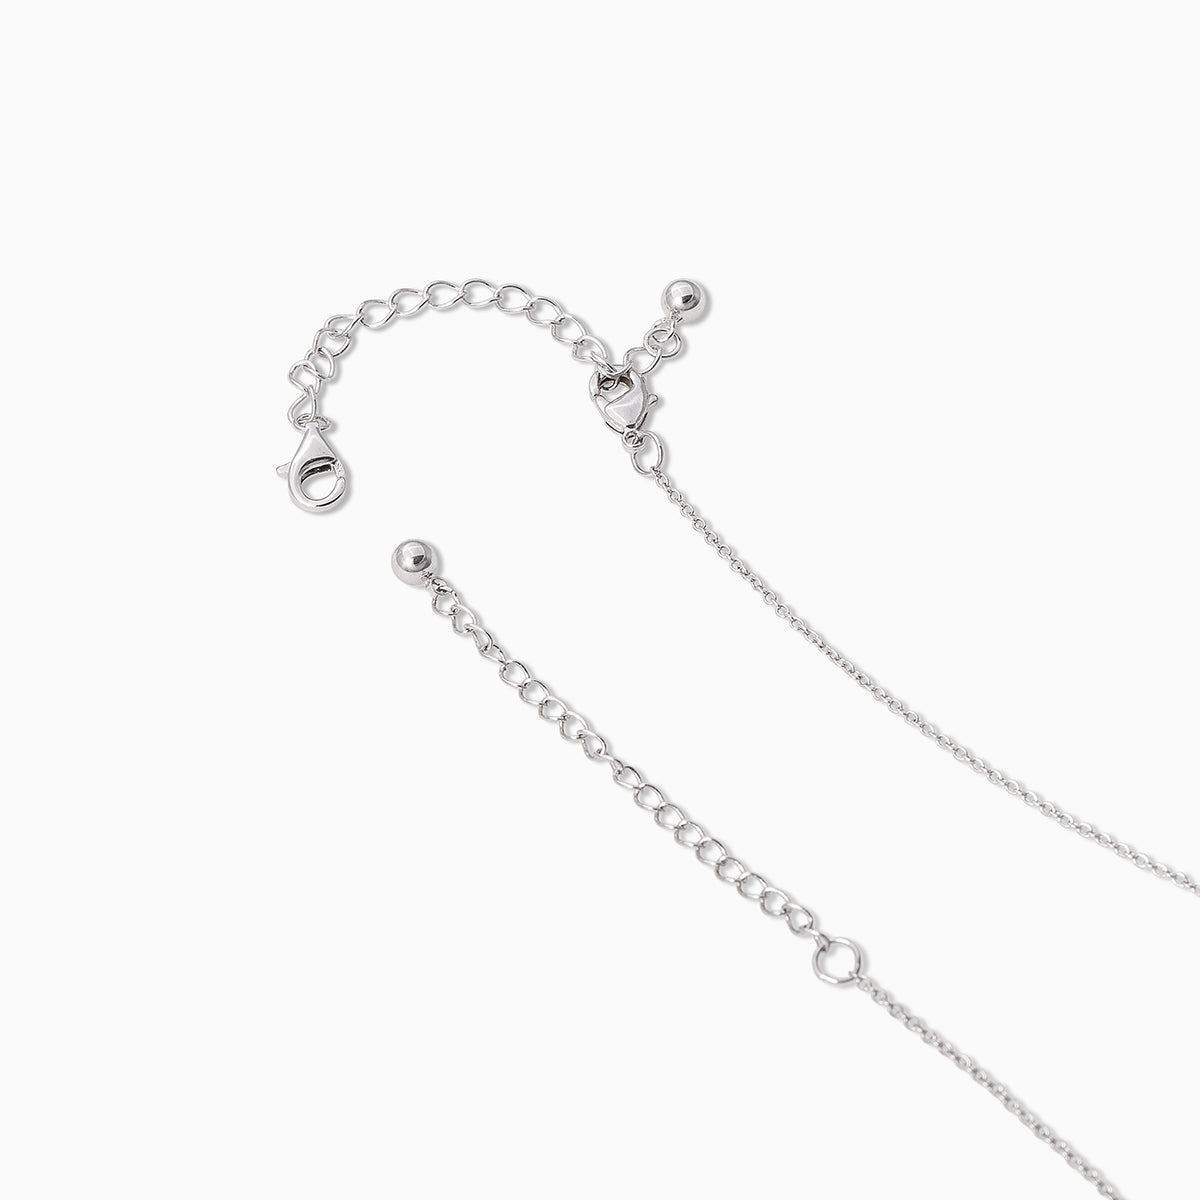 Sterling Silver Chain Extender - The Perfect Keepsake Gift